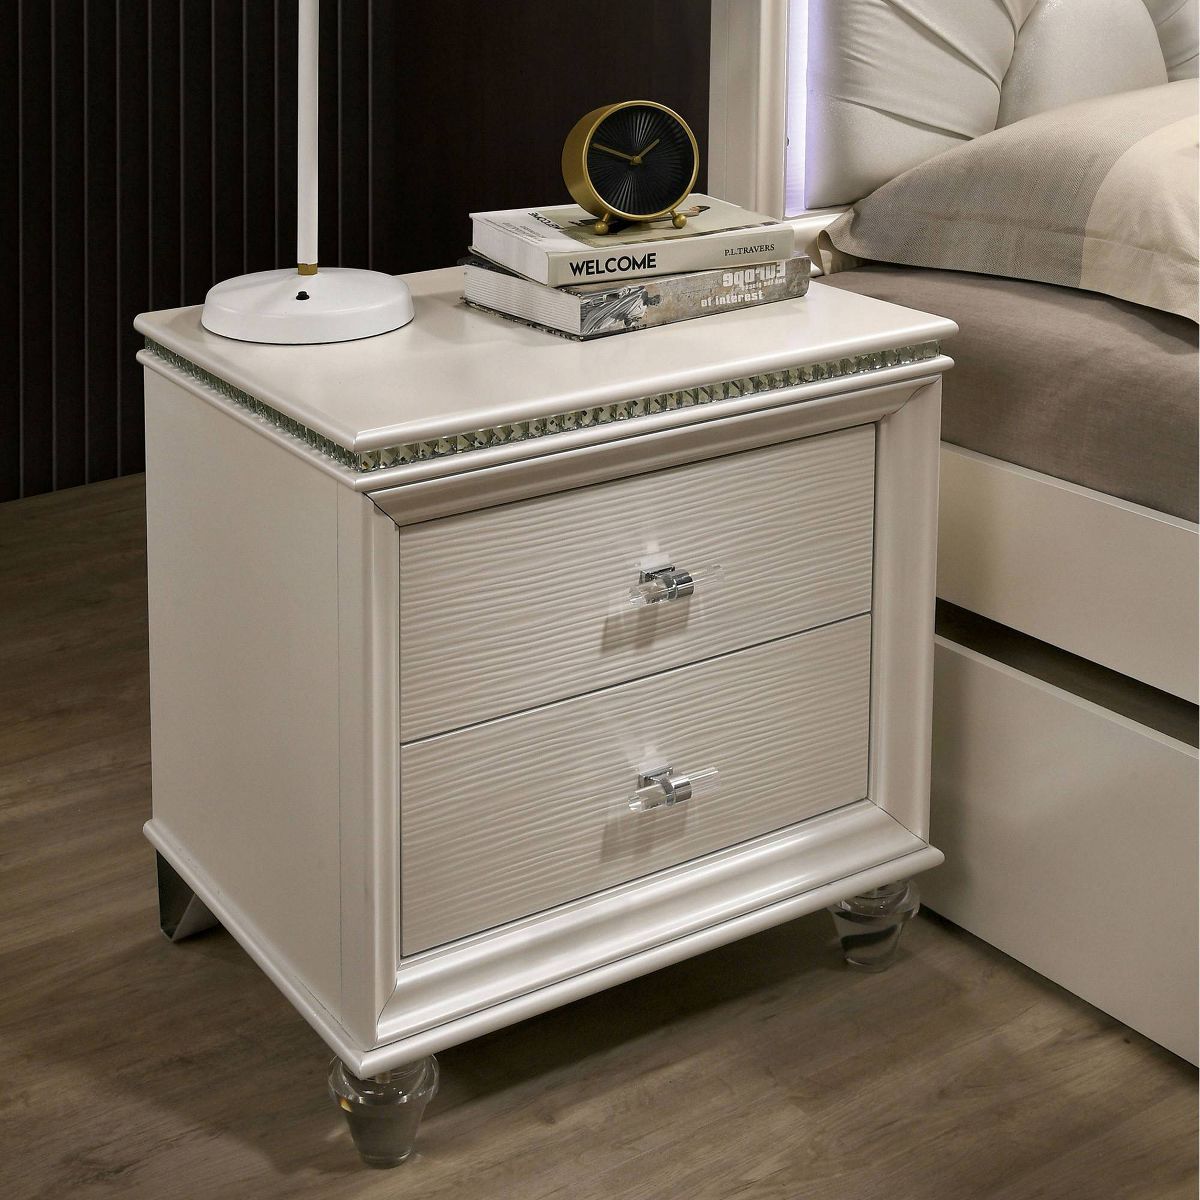 Fosset 2 Drawer Acrylic Legs Nightstand Pearl White - HOMES: Inside + Out | Target